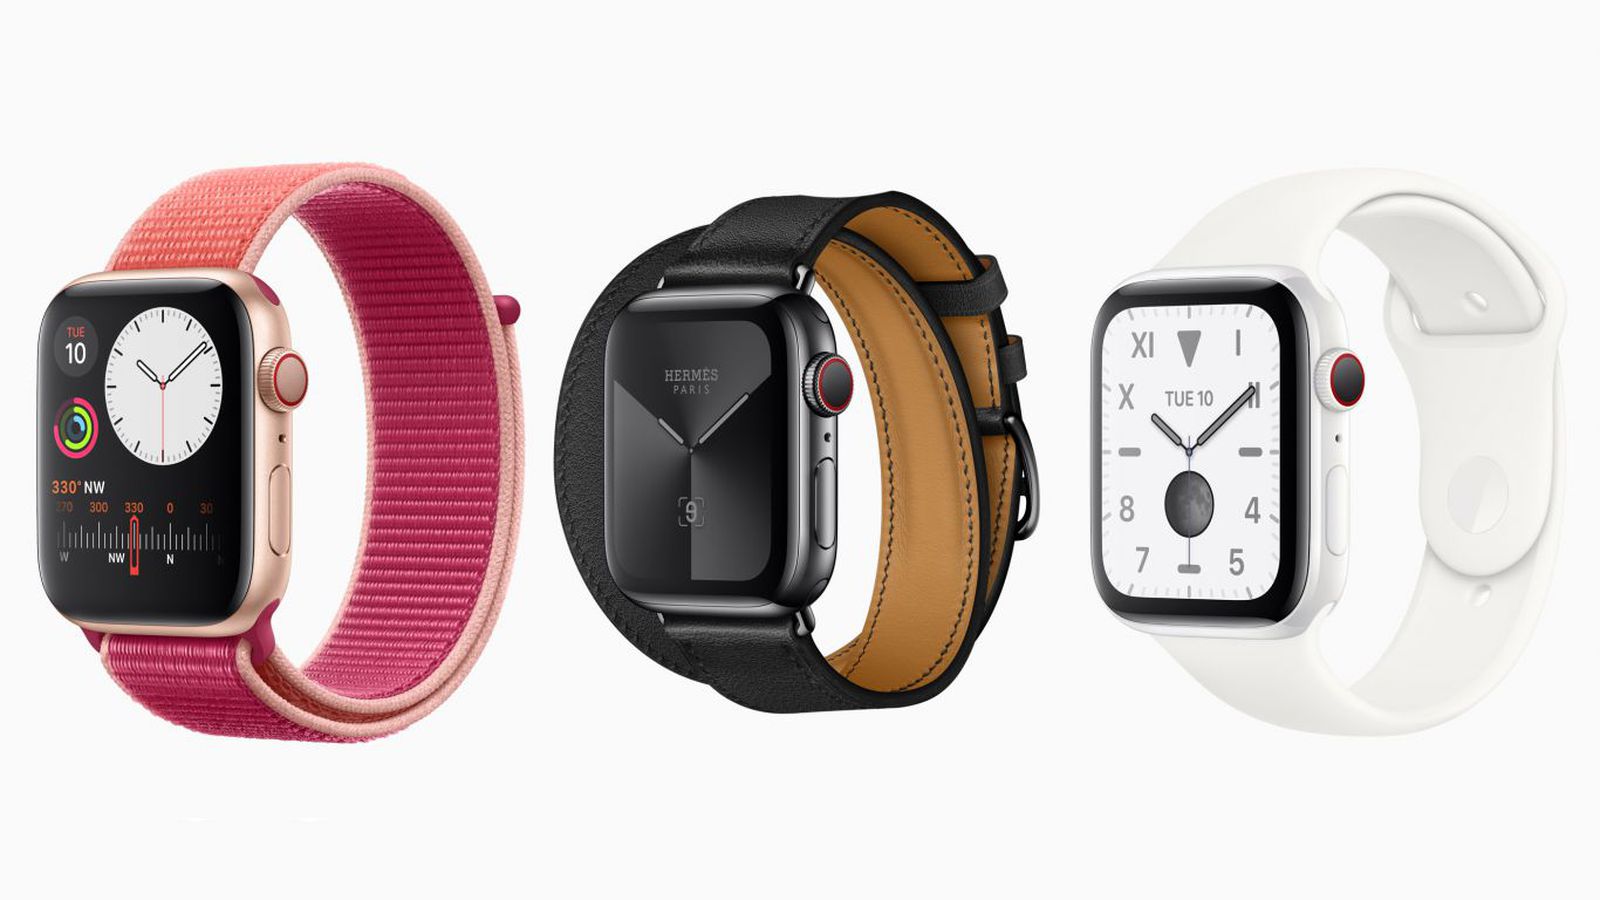 Apple Watch Series 5 Models Offer 32GB of Storage, Up From 16GB in